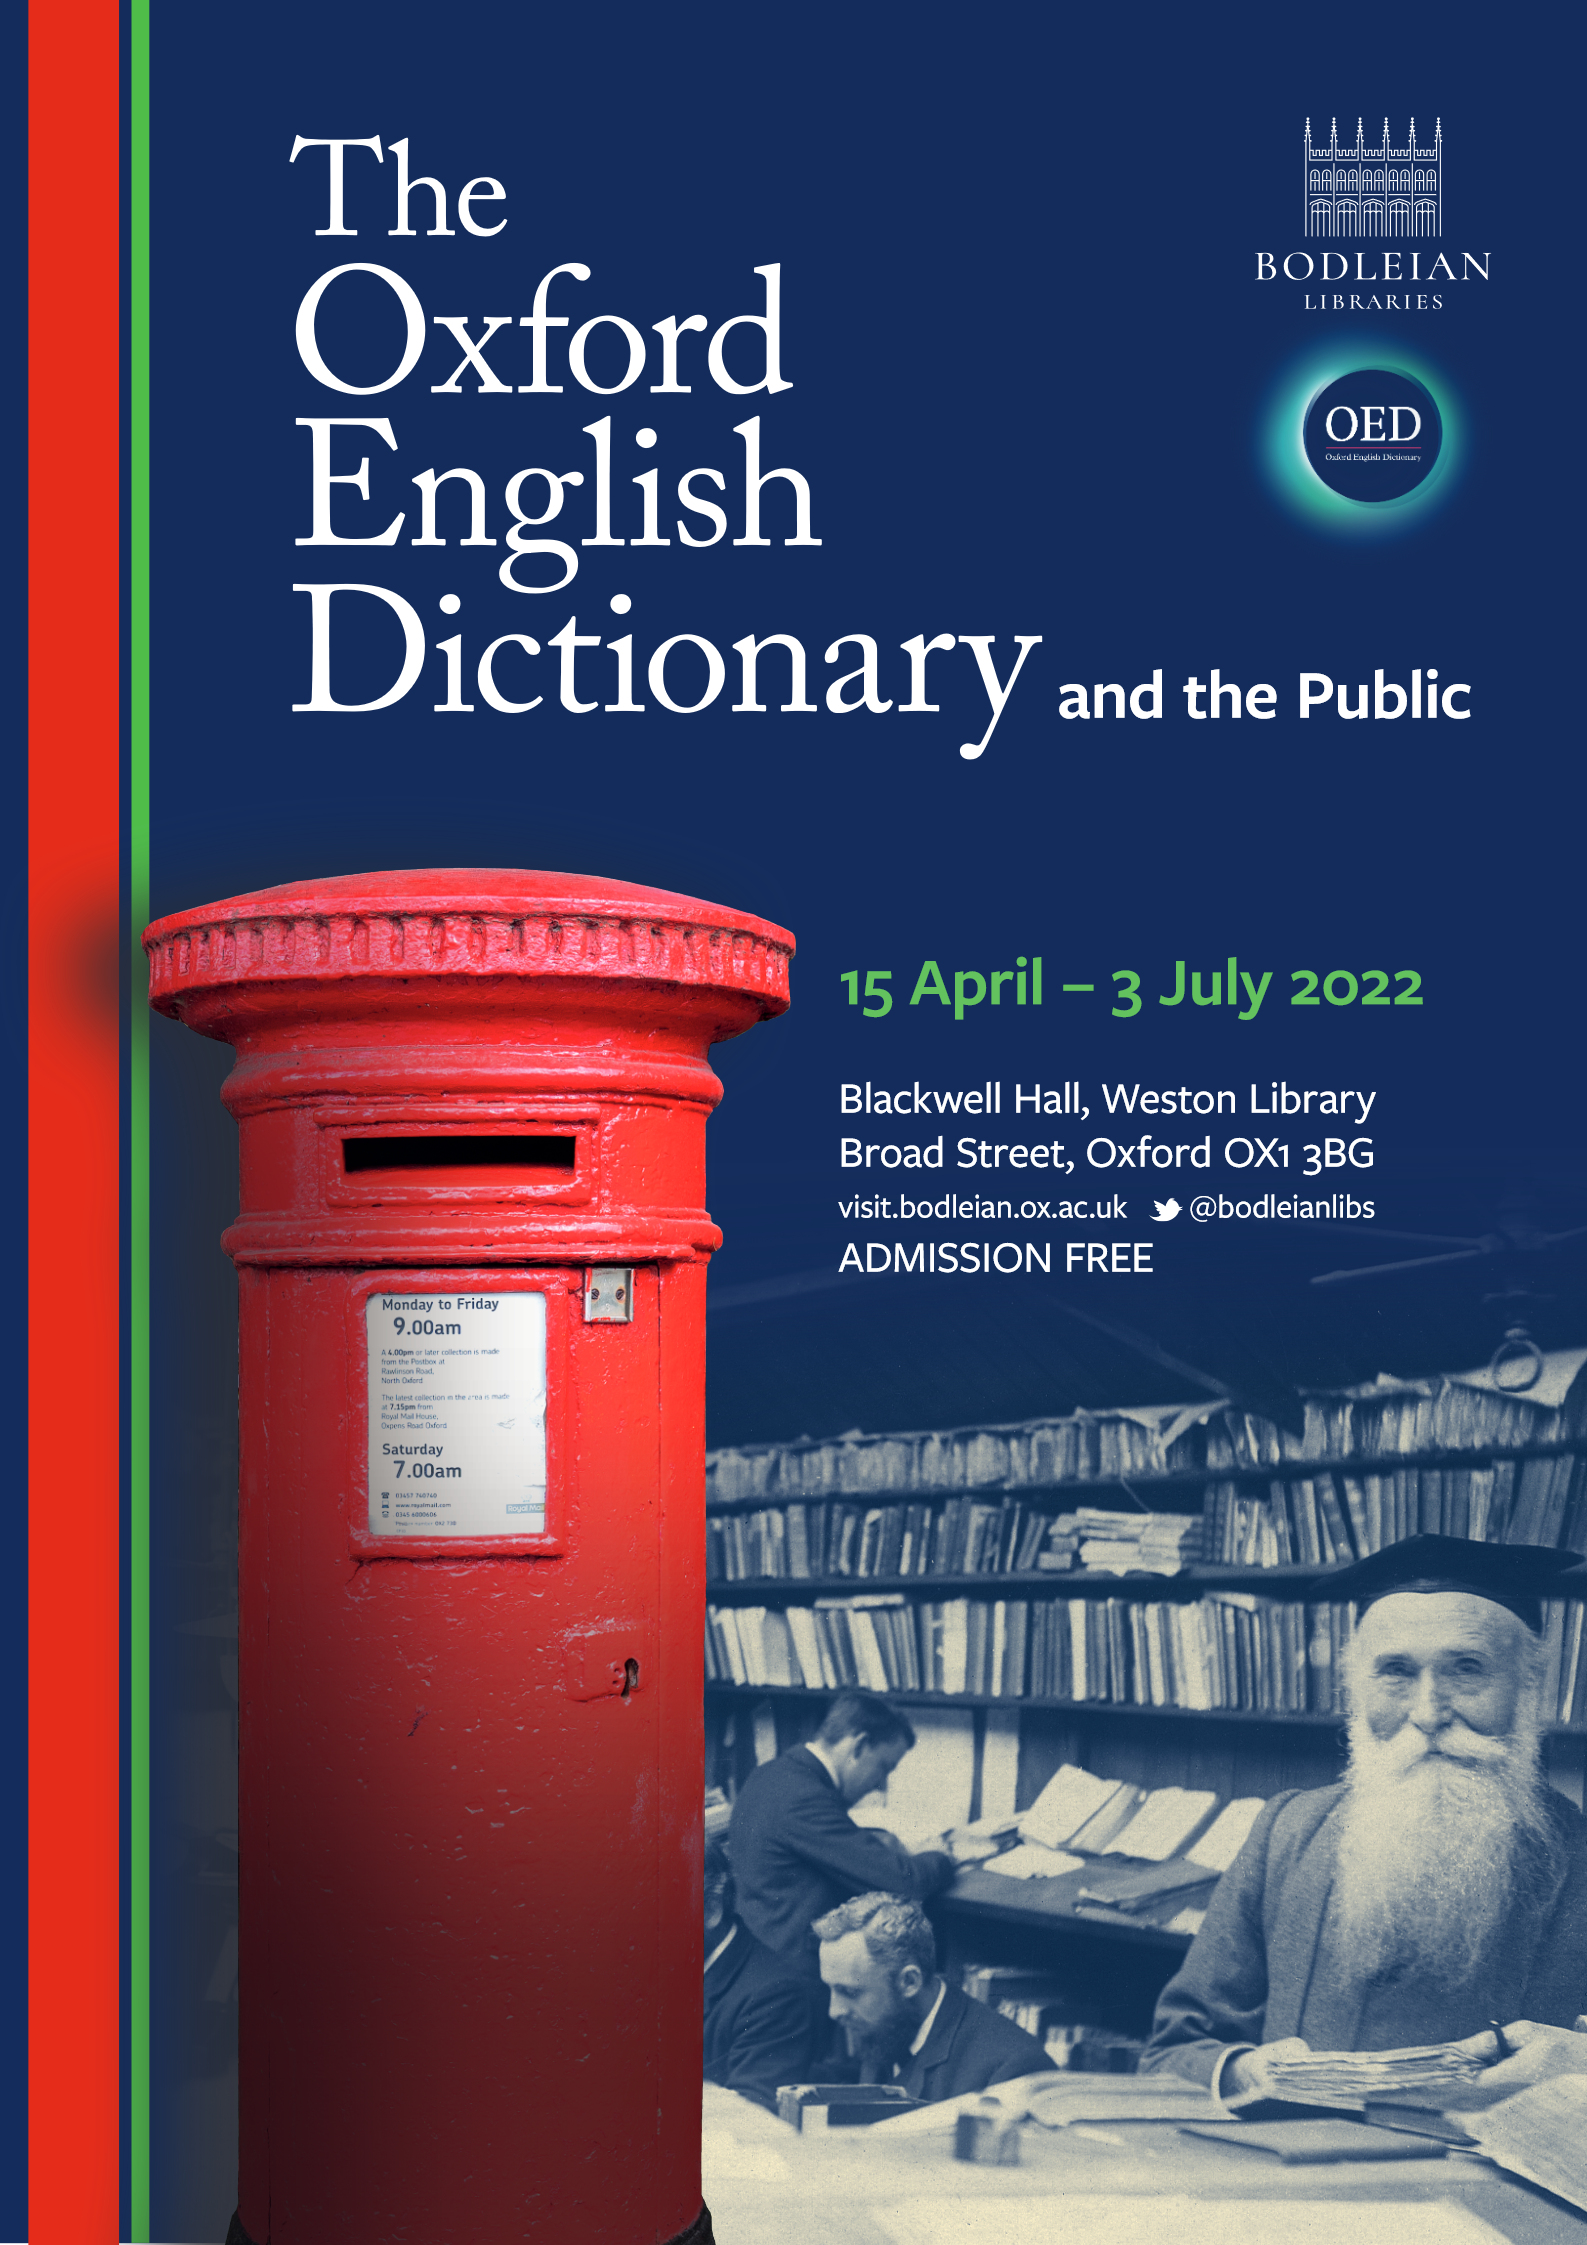 The Oxford Dictionary and the Faculty of English